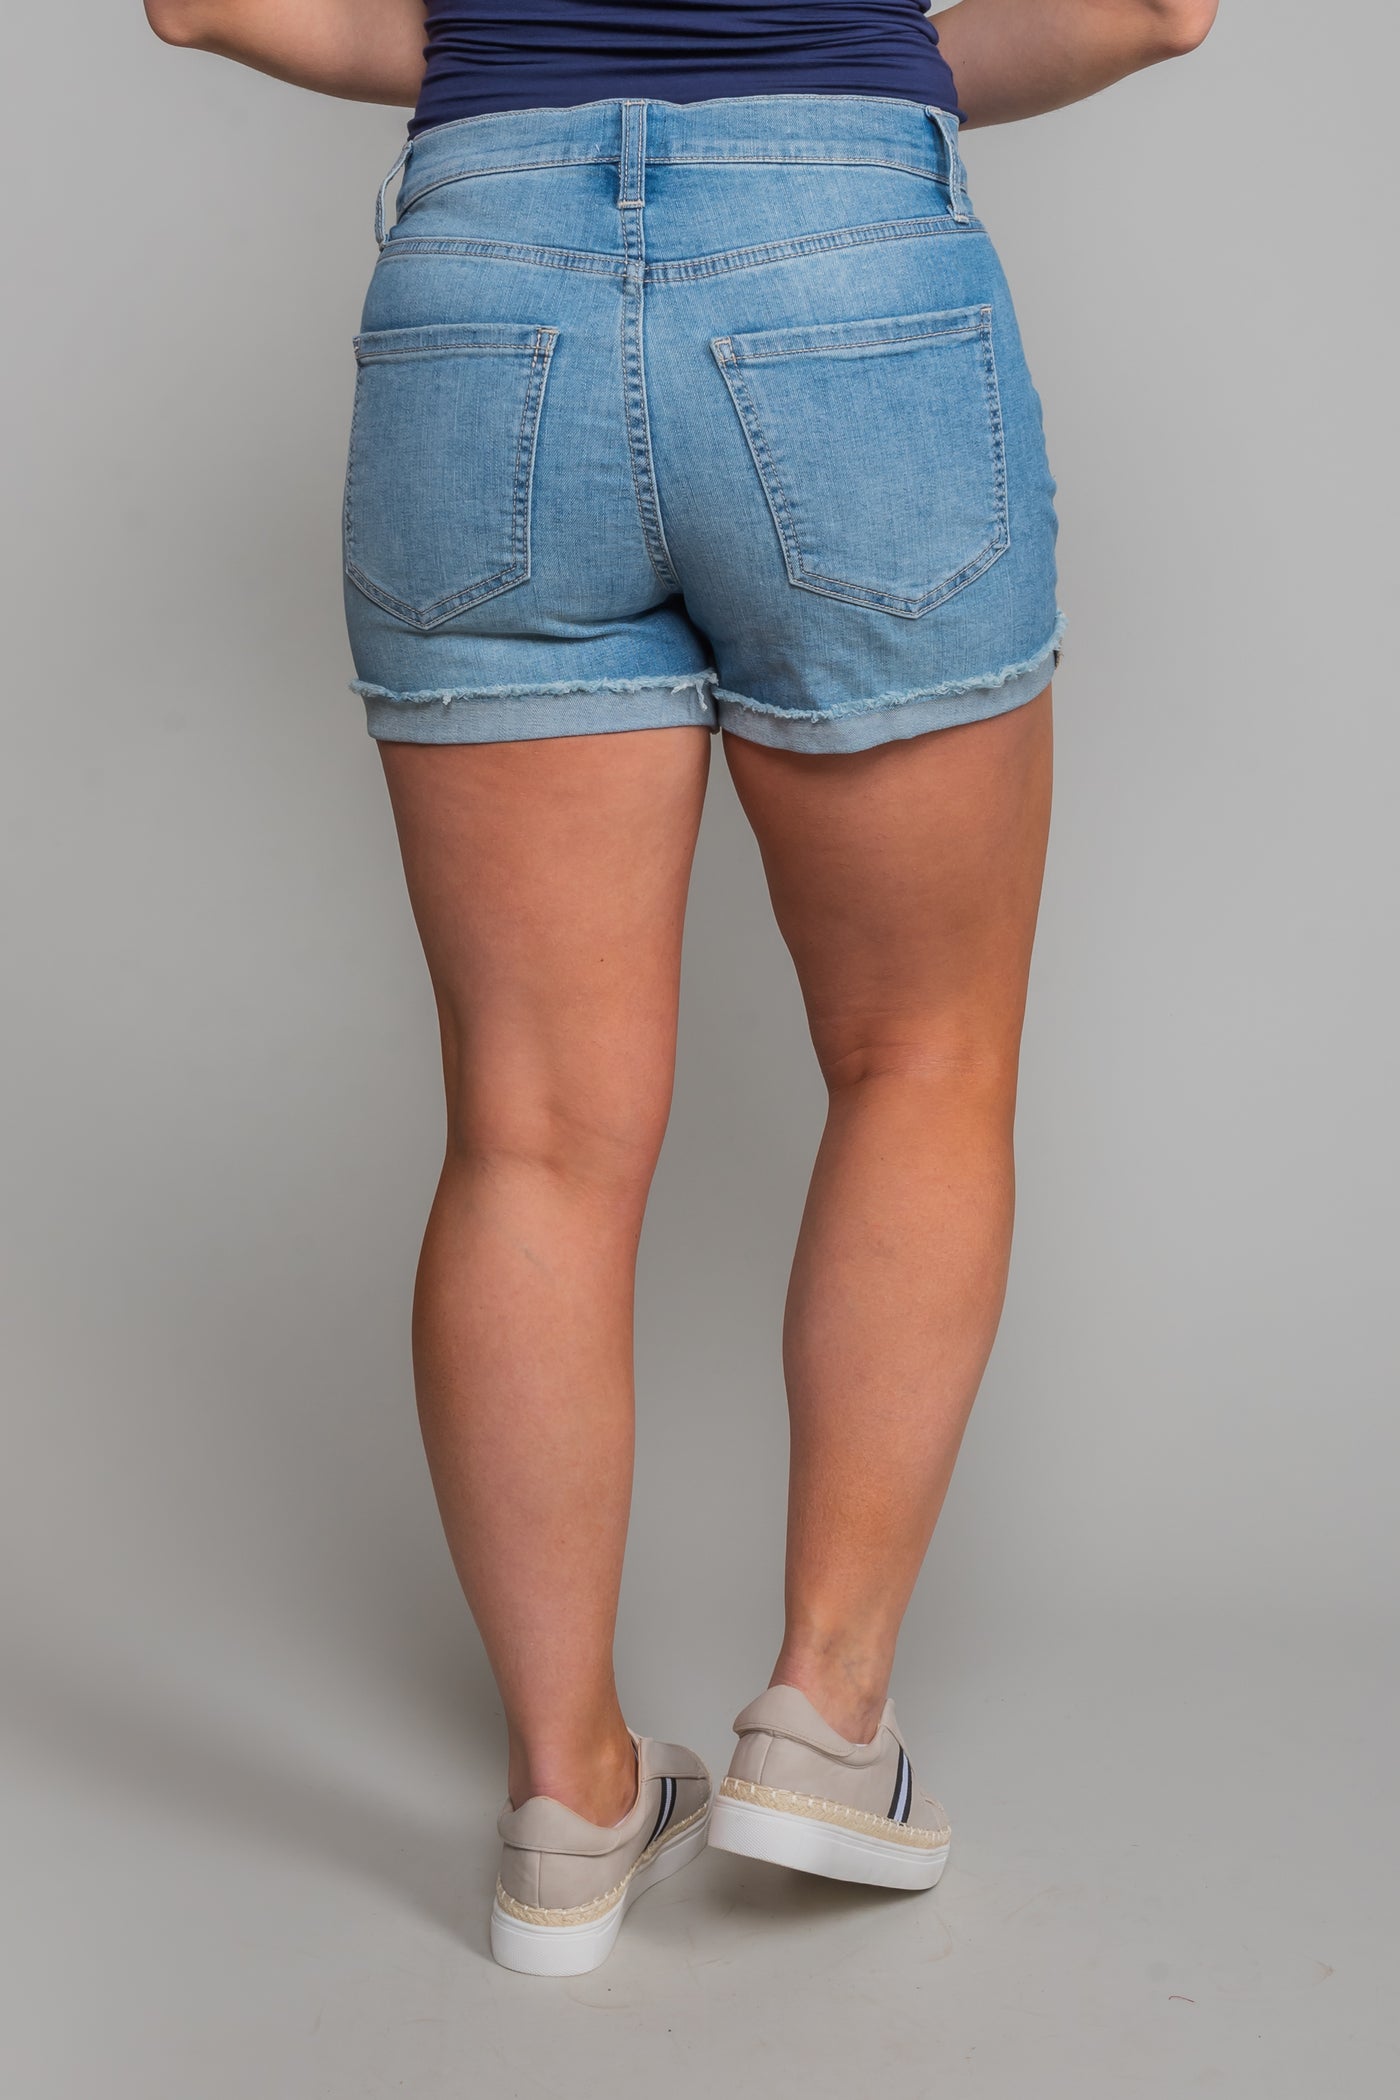 Back Road Mid-Rise Shorts (Small) - FINAL SALE